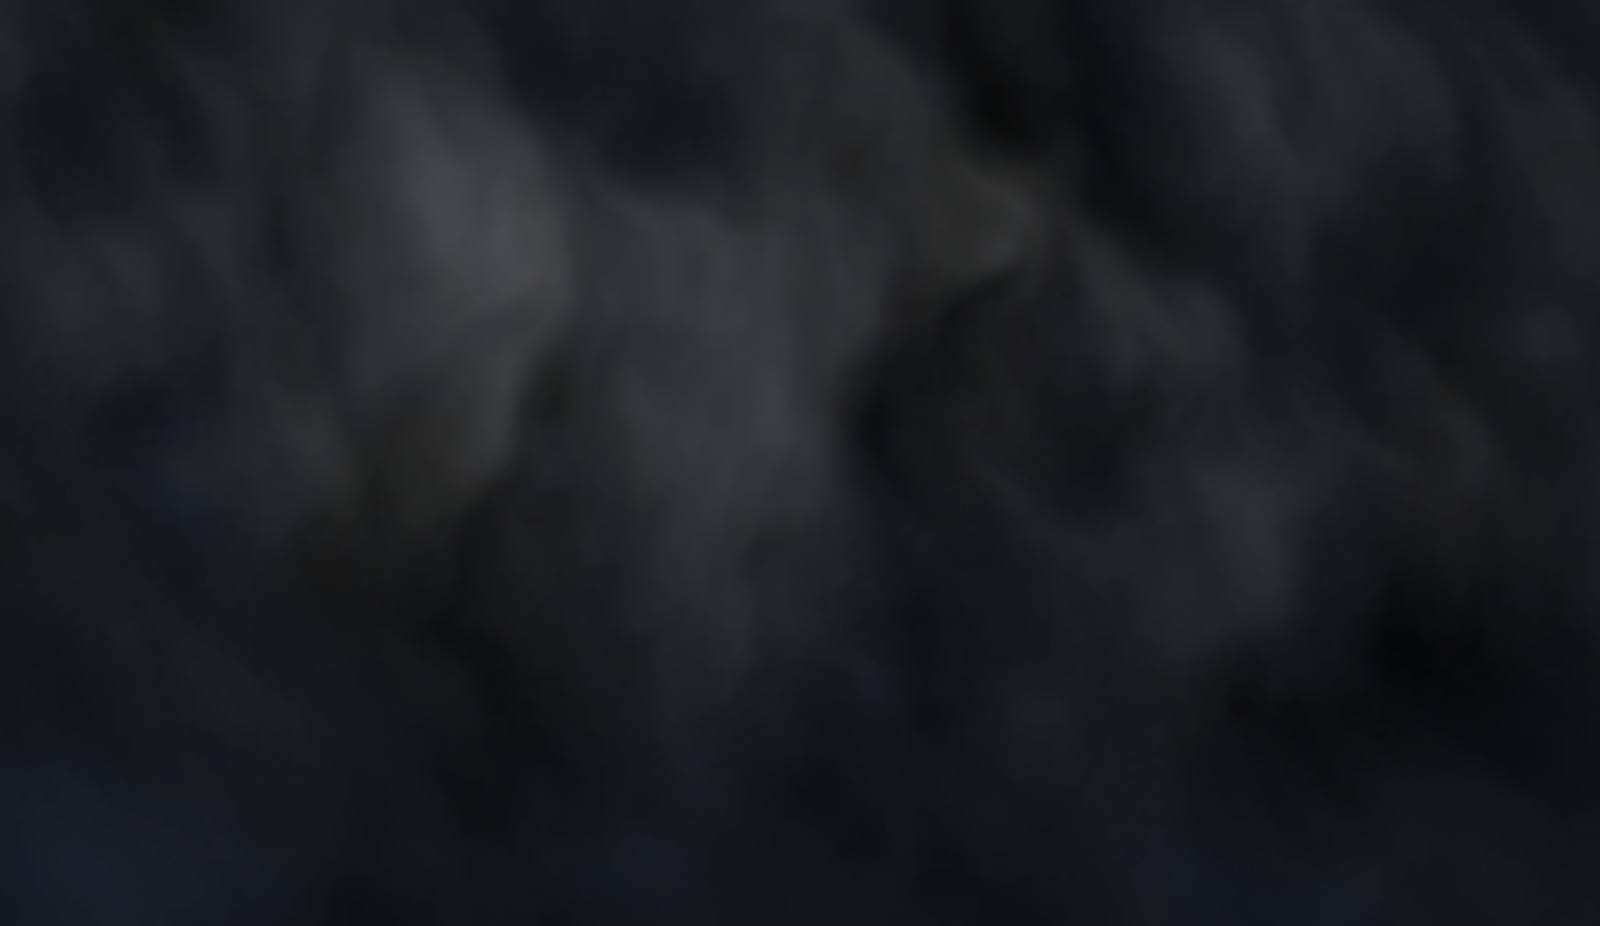 Editable vector background of dark billowing smoke made with a gradient mesh